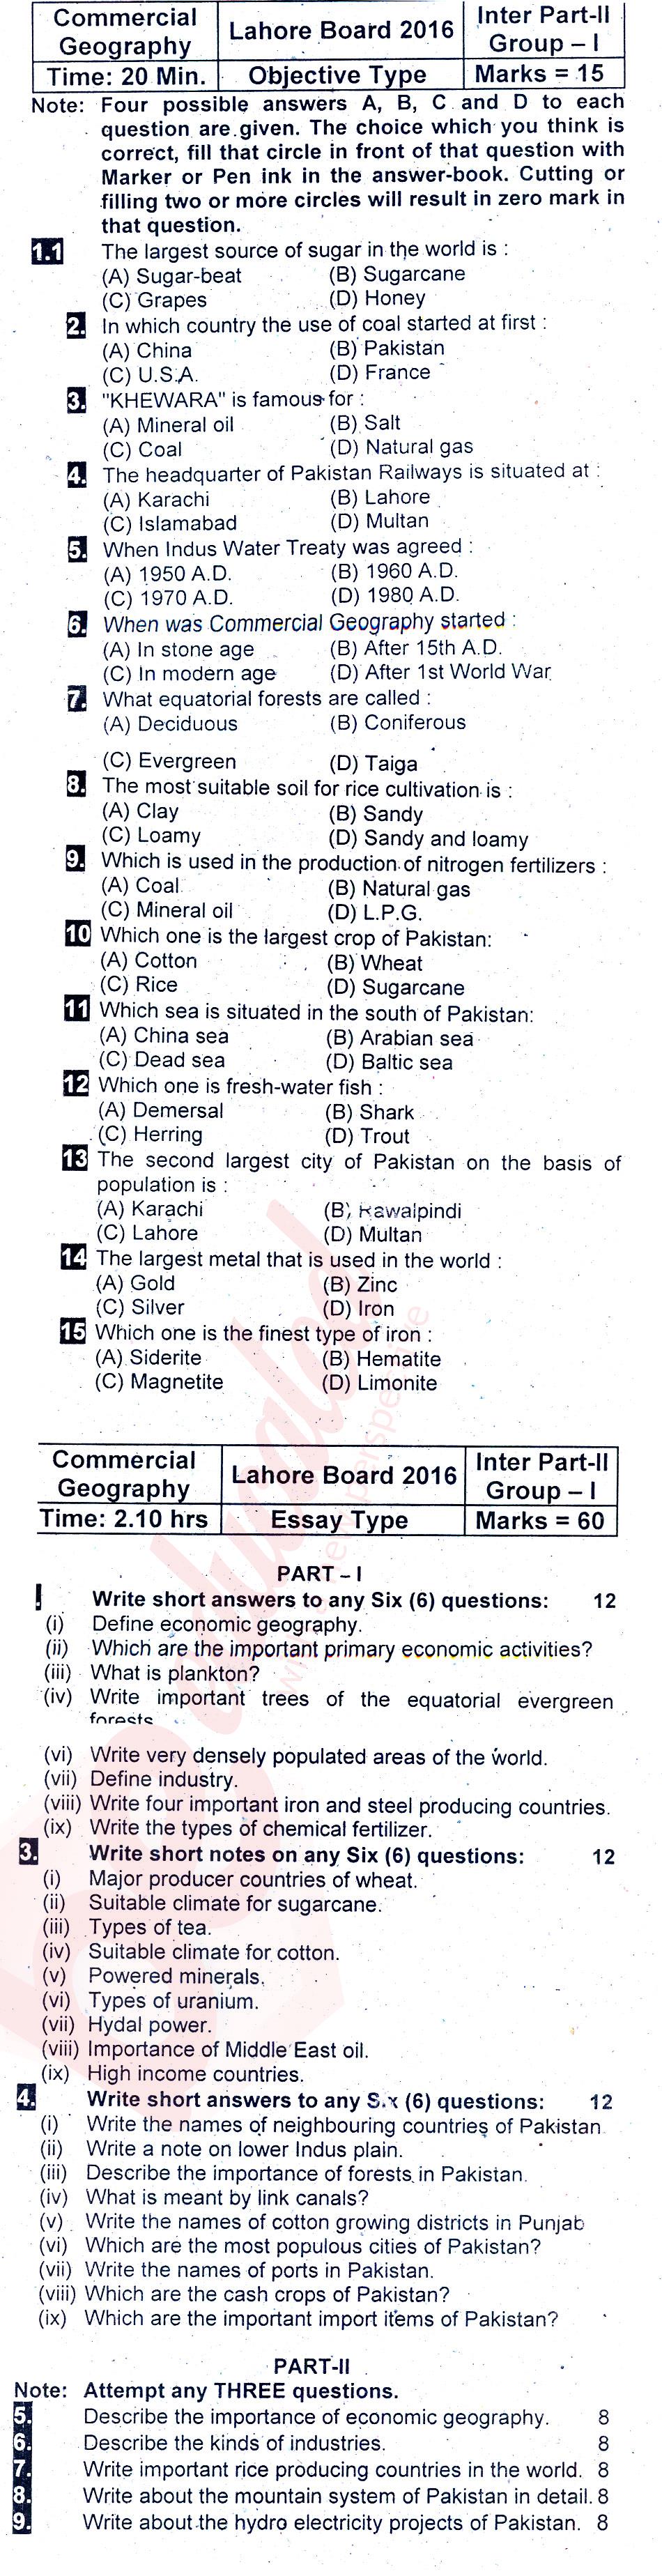 Commercial Geography ICOM Part 2 Past Paper Group 1 BISE Lahore 2016